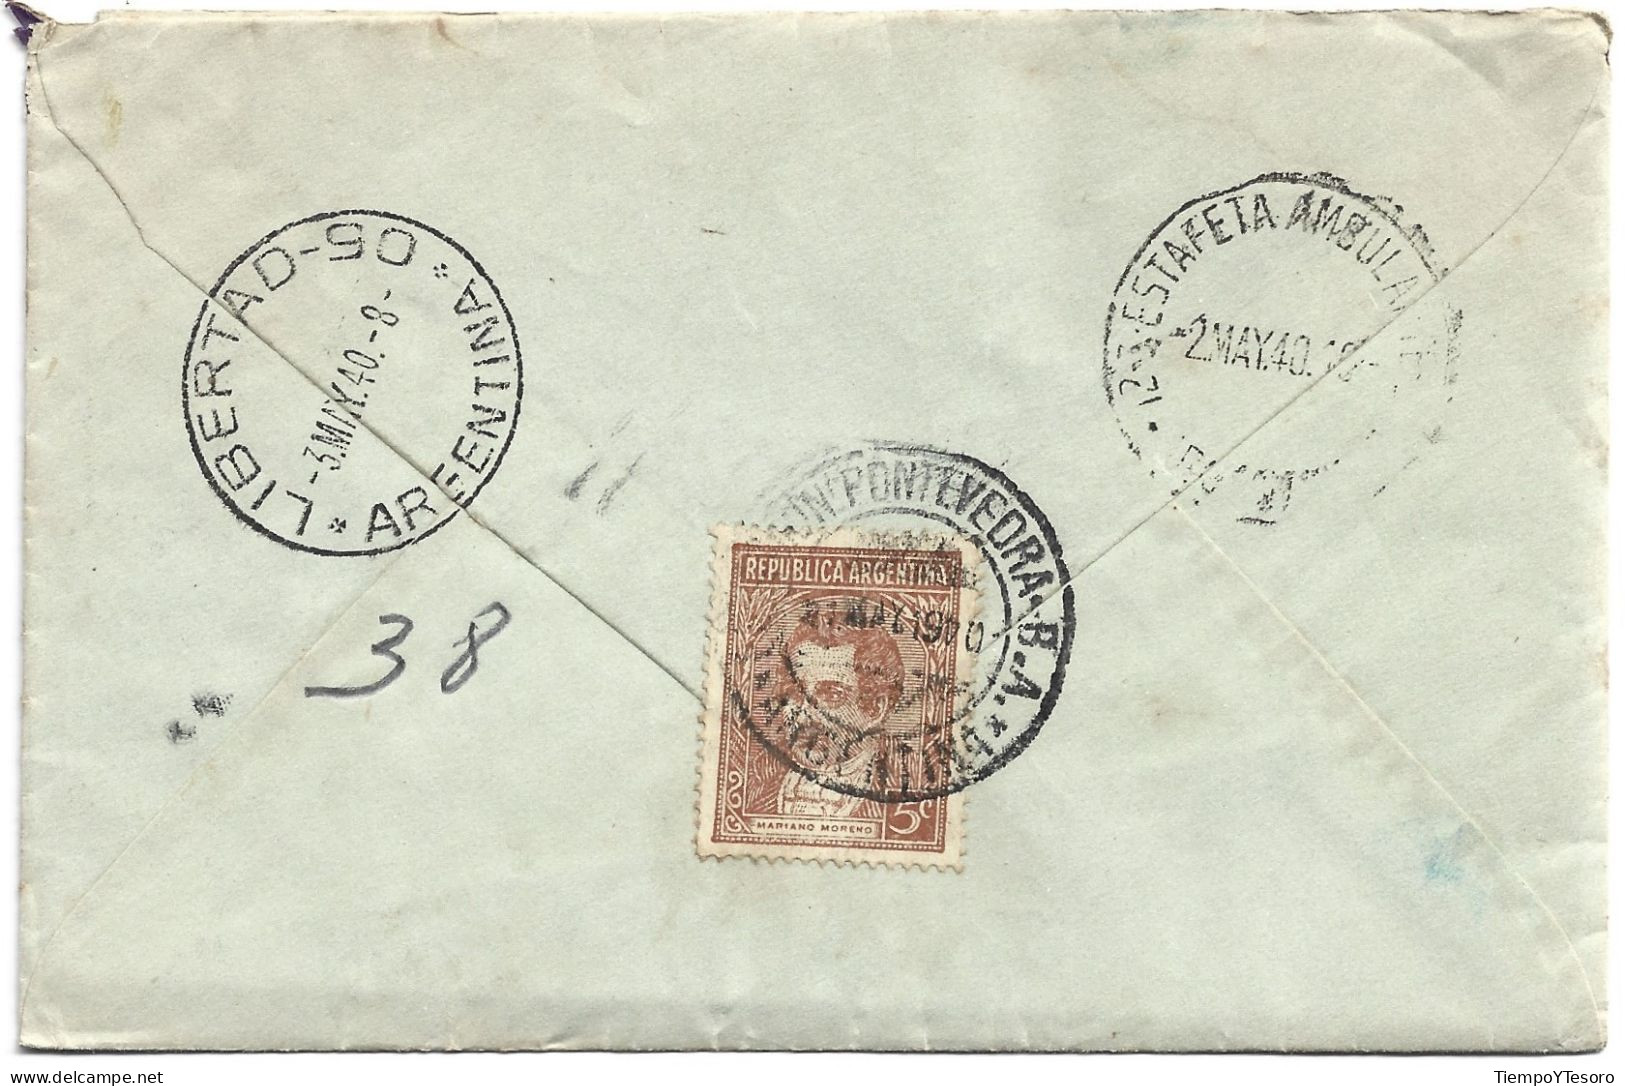 Postcard - Argentina, Buenos Aires, Mariano Moreno Stamp, 1940, N°1546 - Covers & Documents